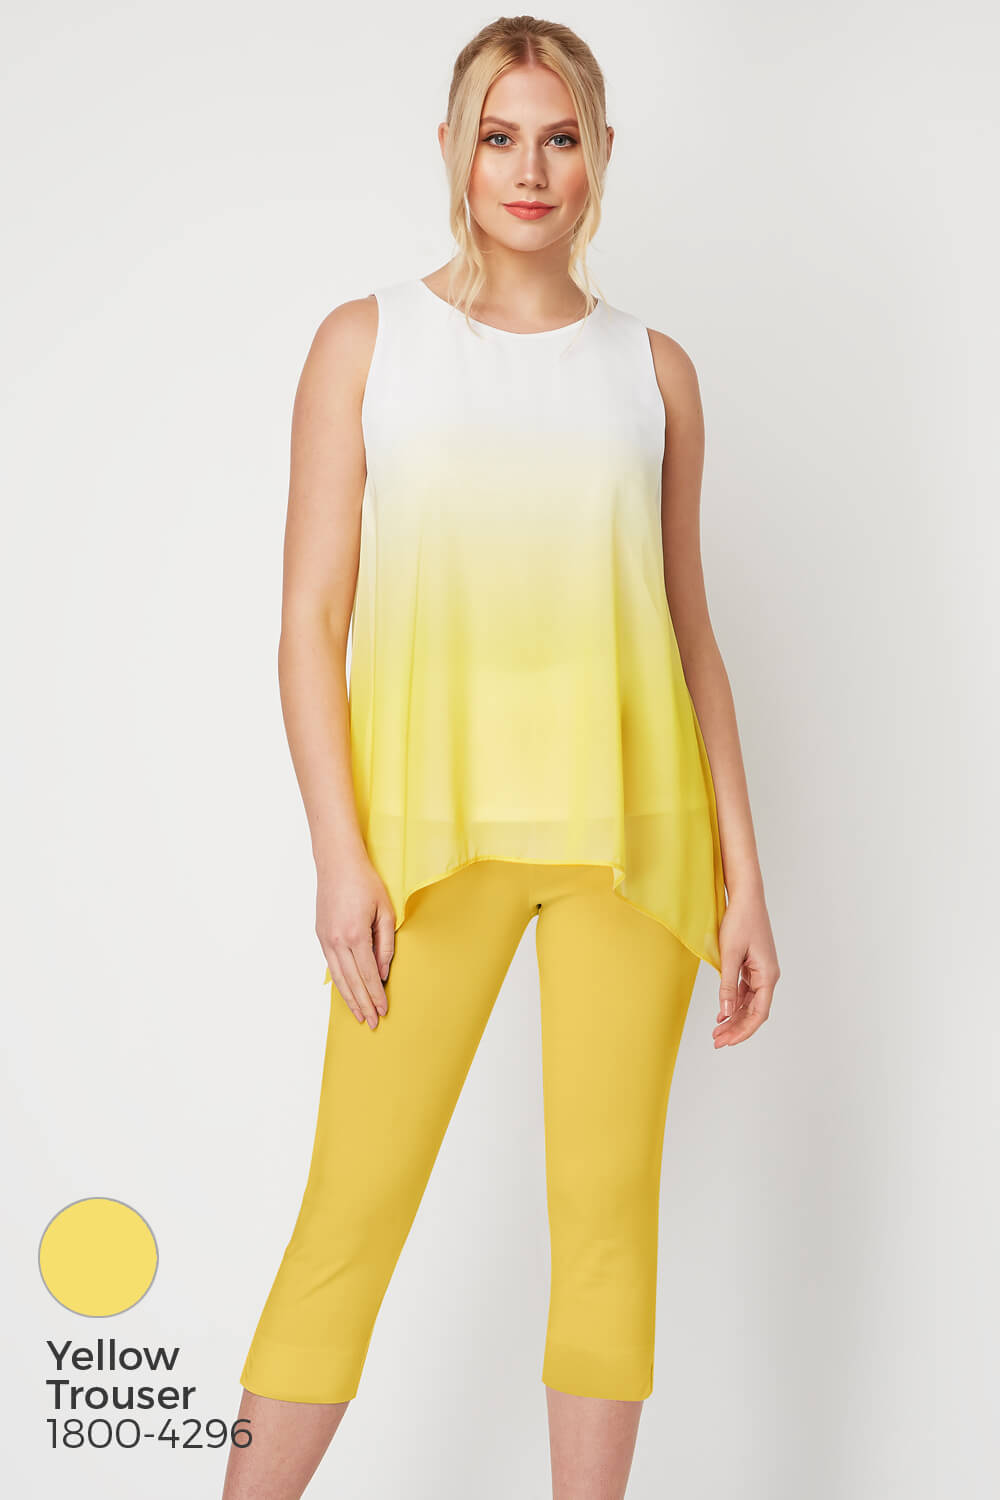 Yellow Ombre Print Overlay Top, Image 6 of 8